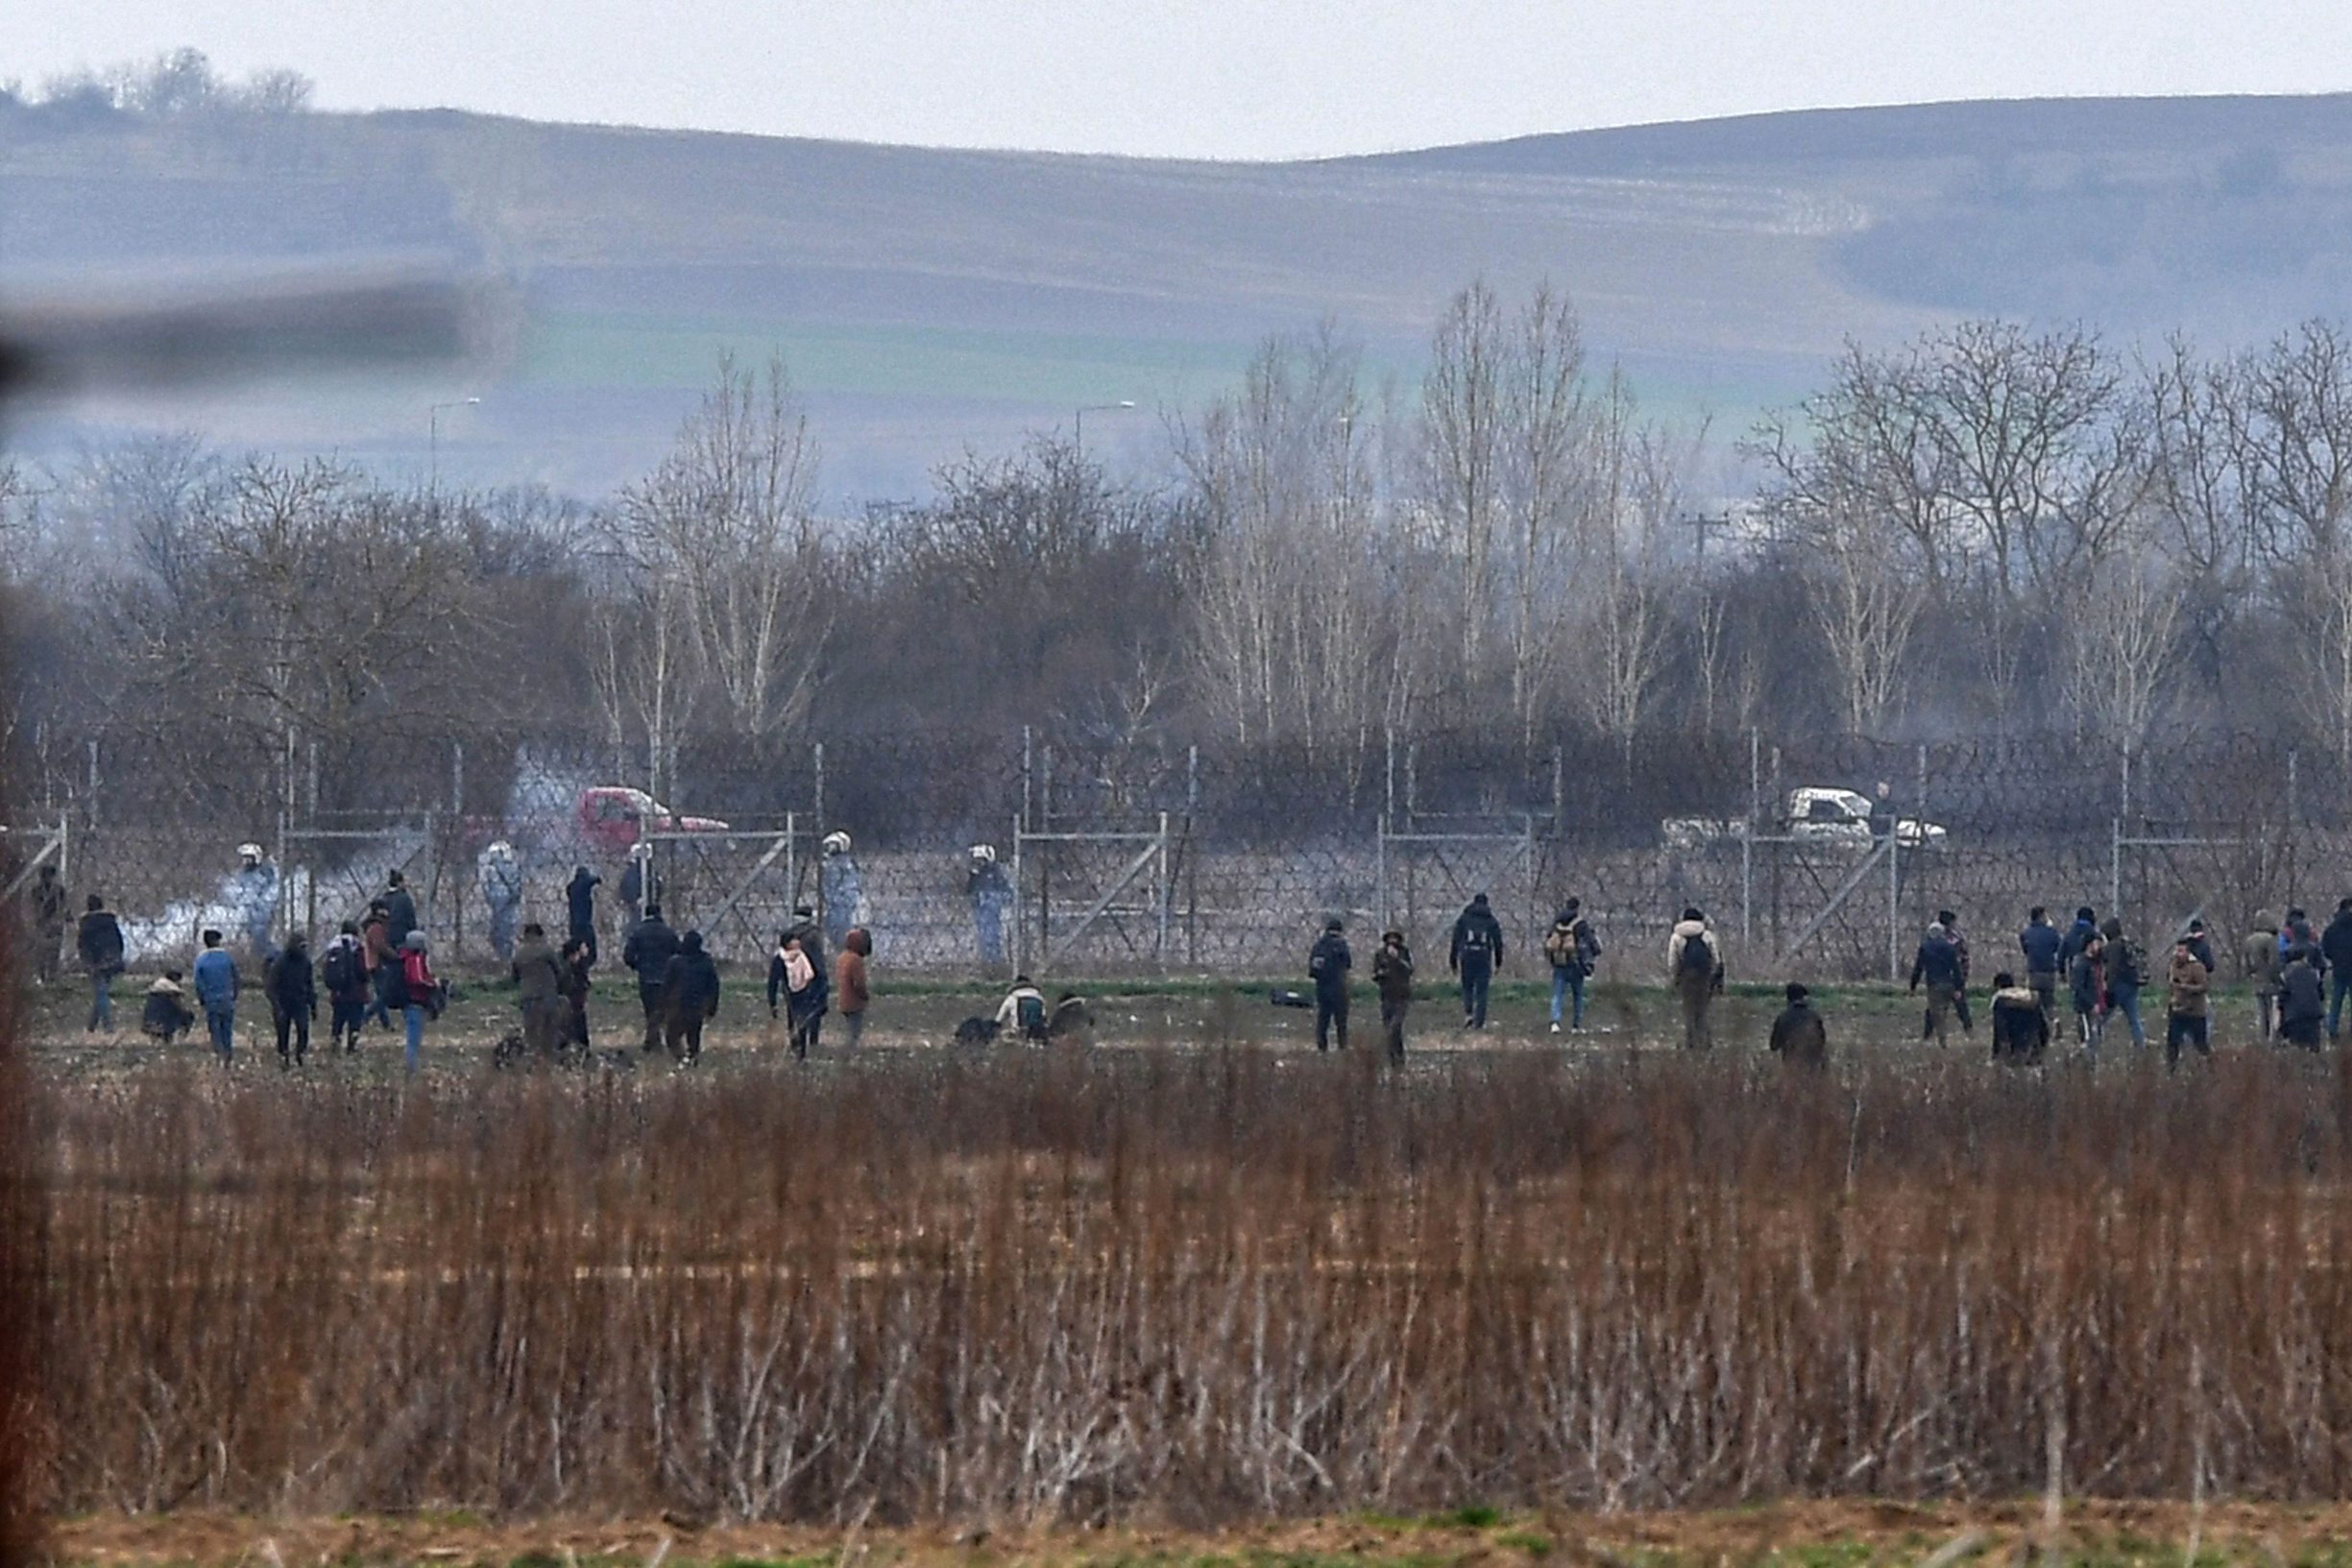 Migrants walk clash with Greek police as they resumed efforts to enter europe next to the fences near Pazarkule border gate in Edirne as Greek Police use tear gas and guns on March 4, 2020. - Migrants and refugees clashed with Greek police on the Turkish border on March 4, 2020, as they resumed efforts to enter Europe, leaving at least one person injured according to AFP correspondents. (Photo by Ozan KOSE / AFP)